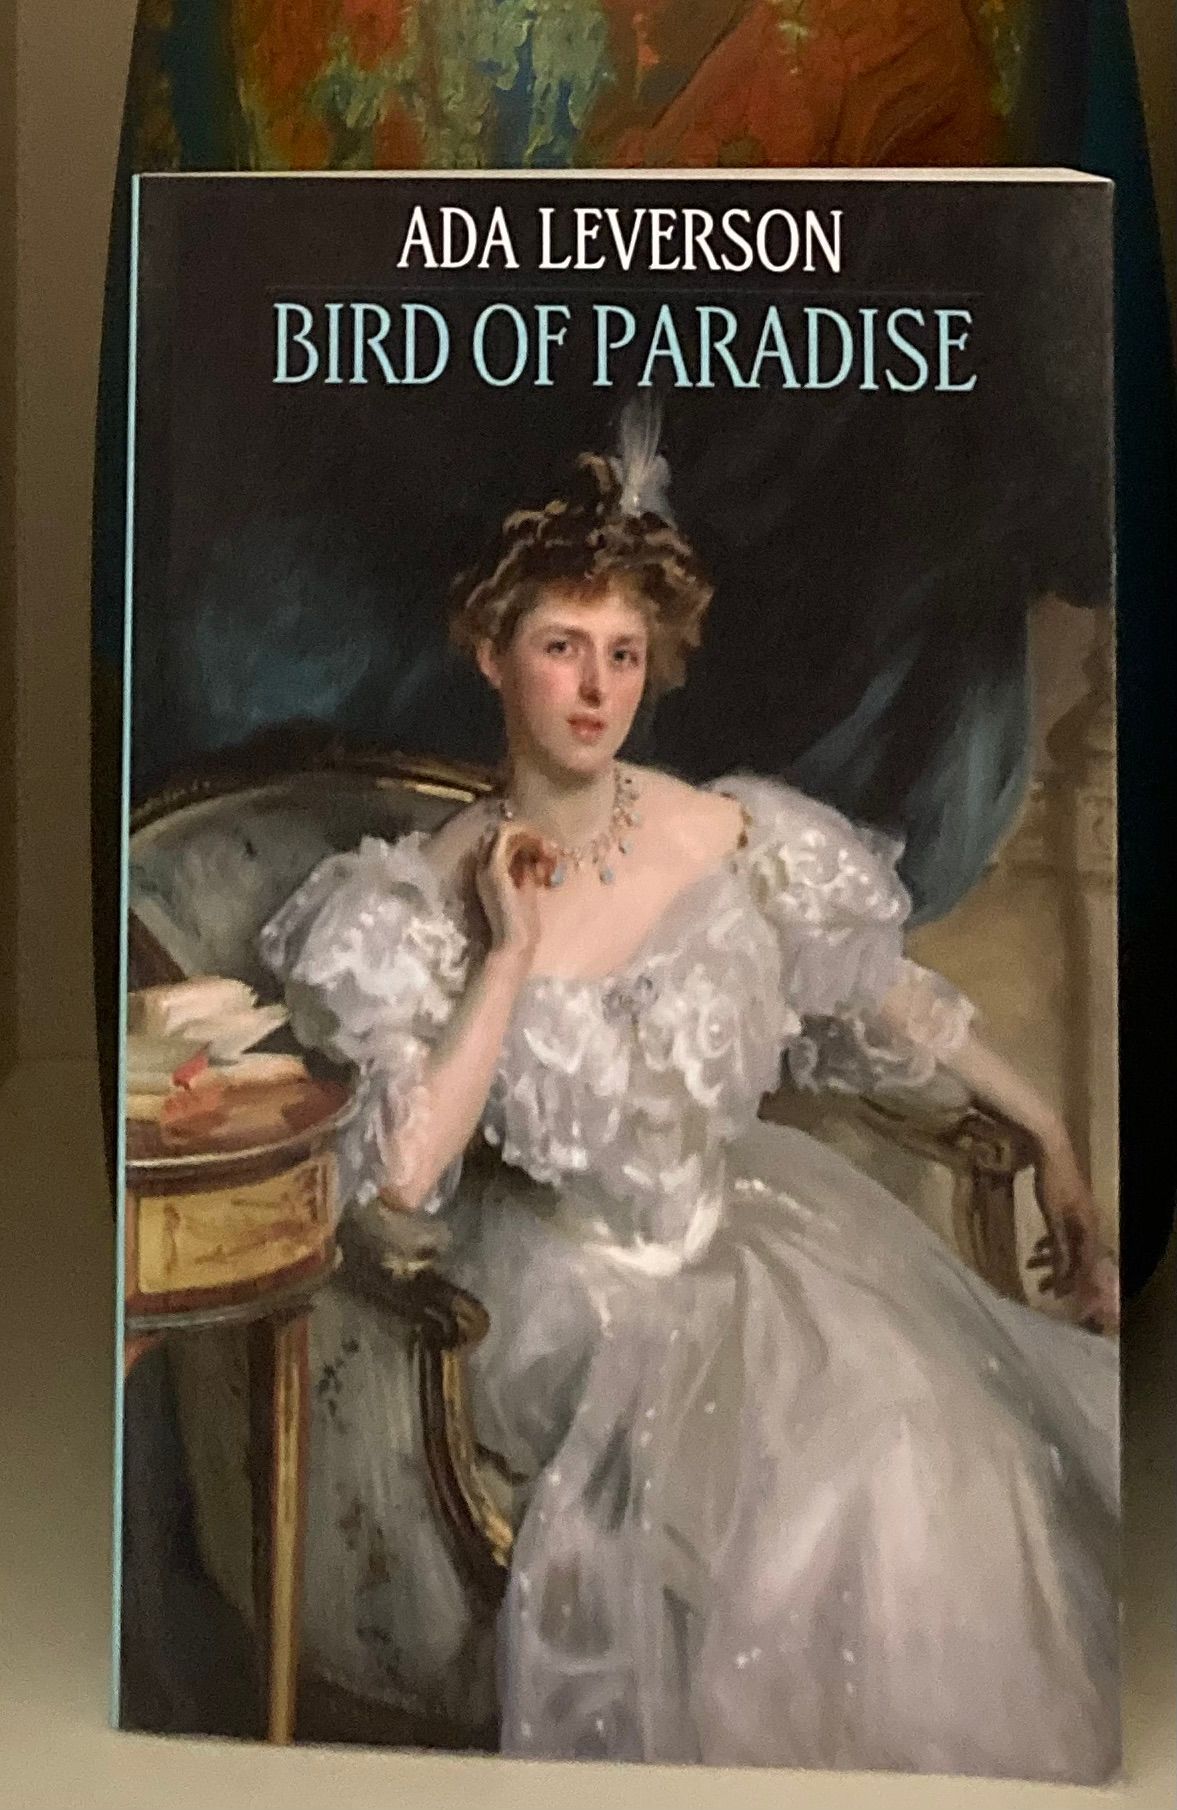 Book cover image of Mrs William George Raphael by John Singer Sargent